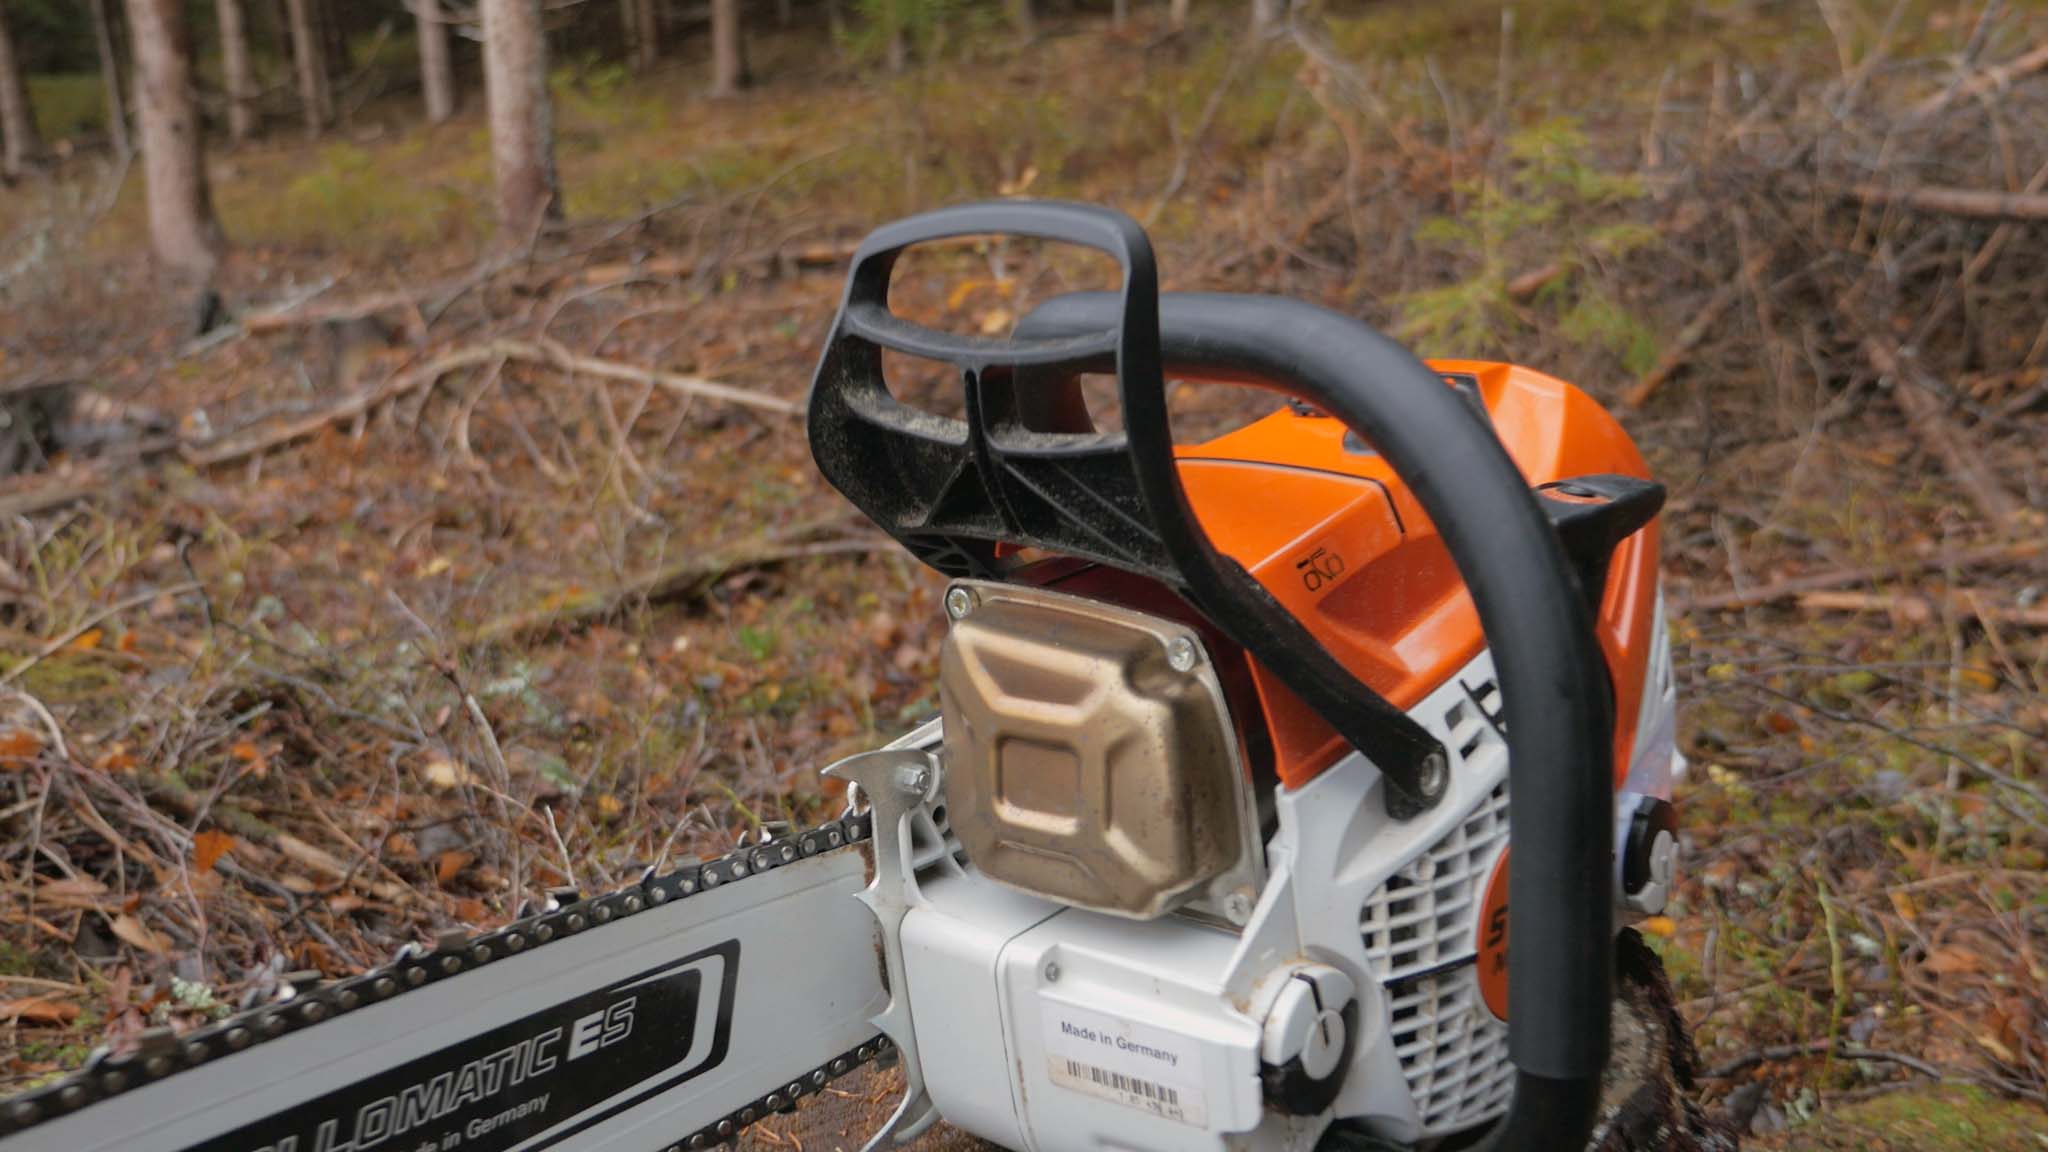 The MS 500i Chainsaw Revealed